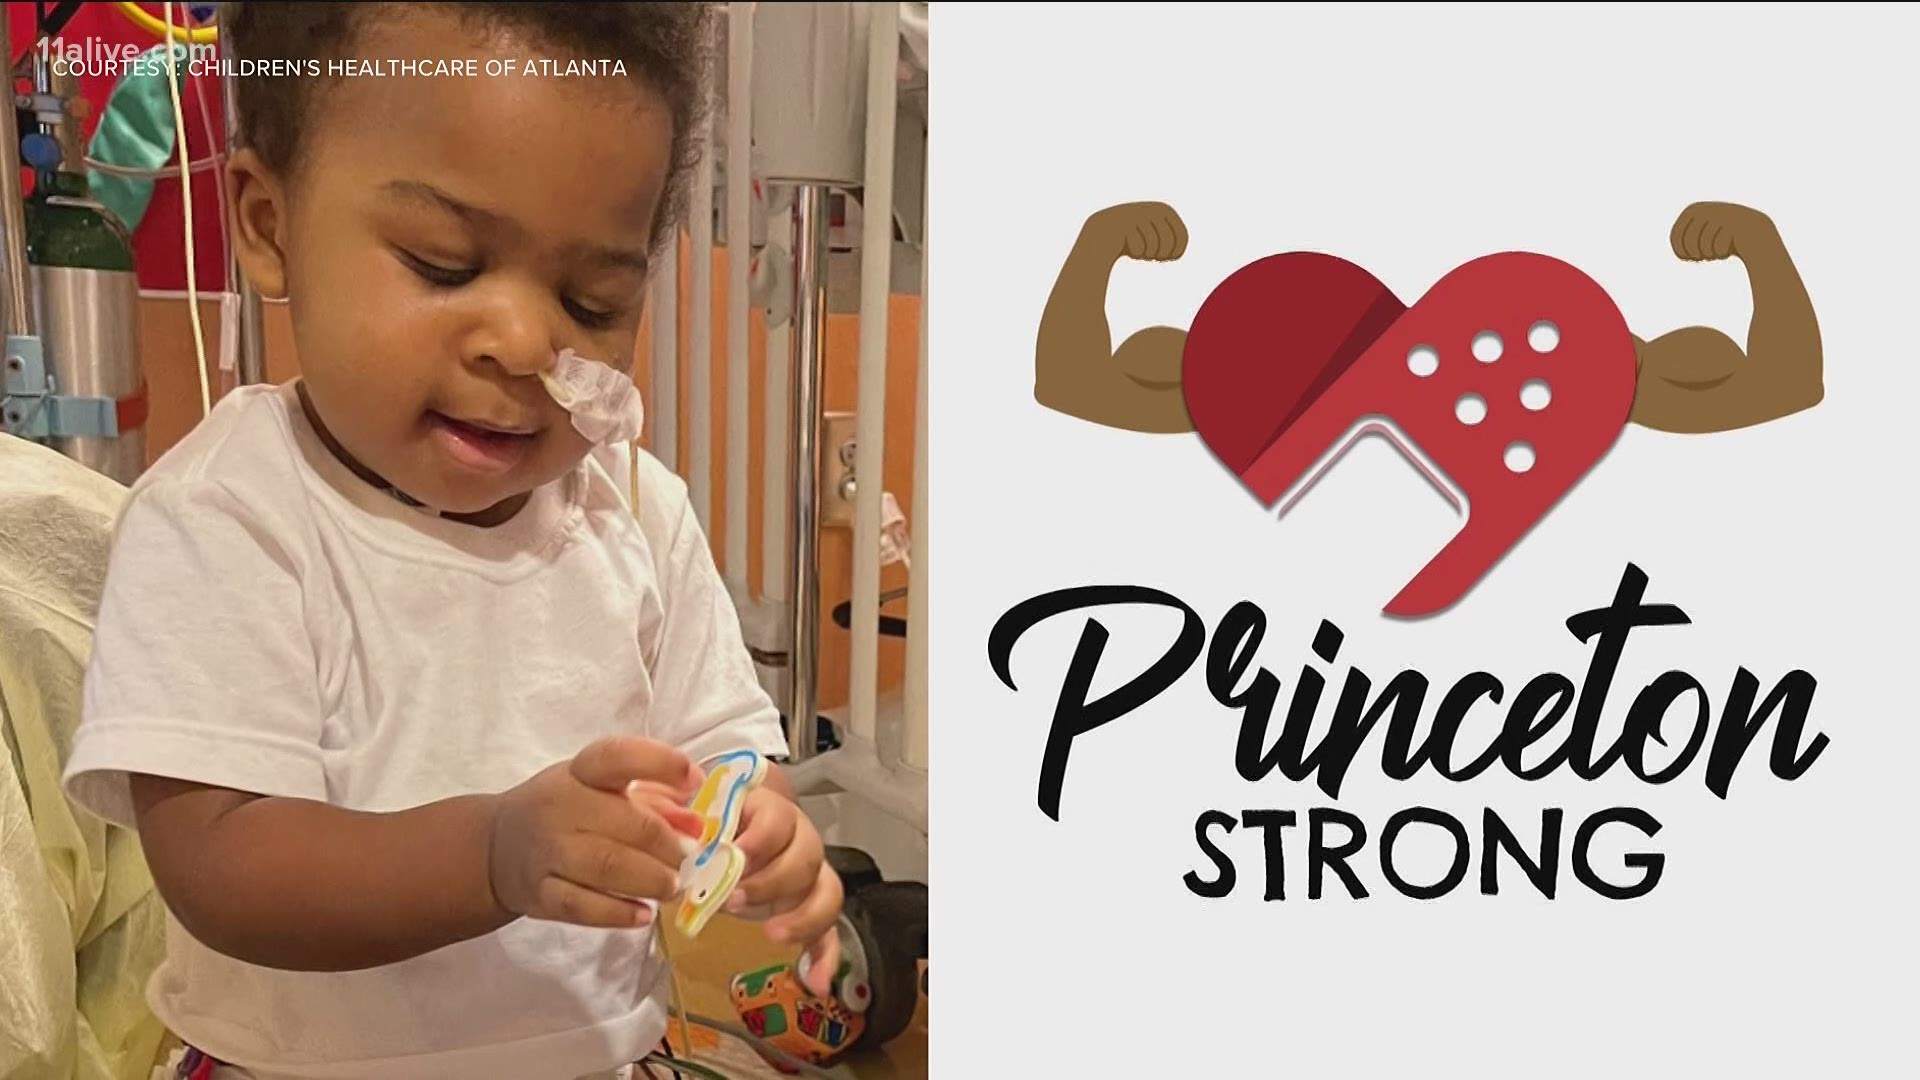 Princeton's mom was so touched by the support they received during their hospital stay, she's planning to pay it forward and help other families